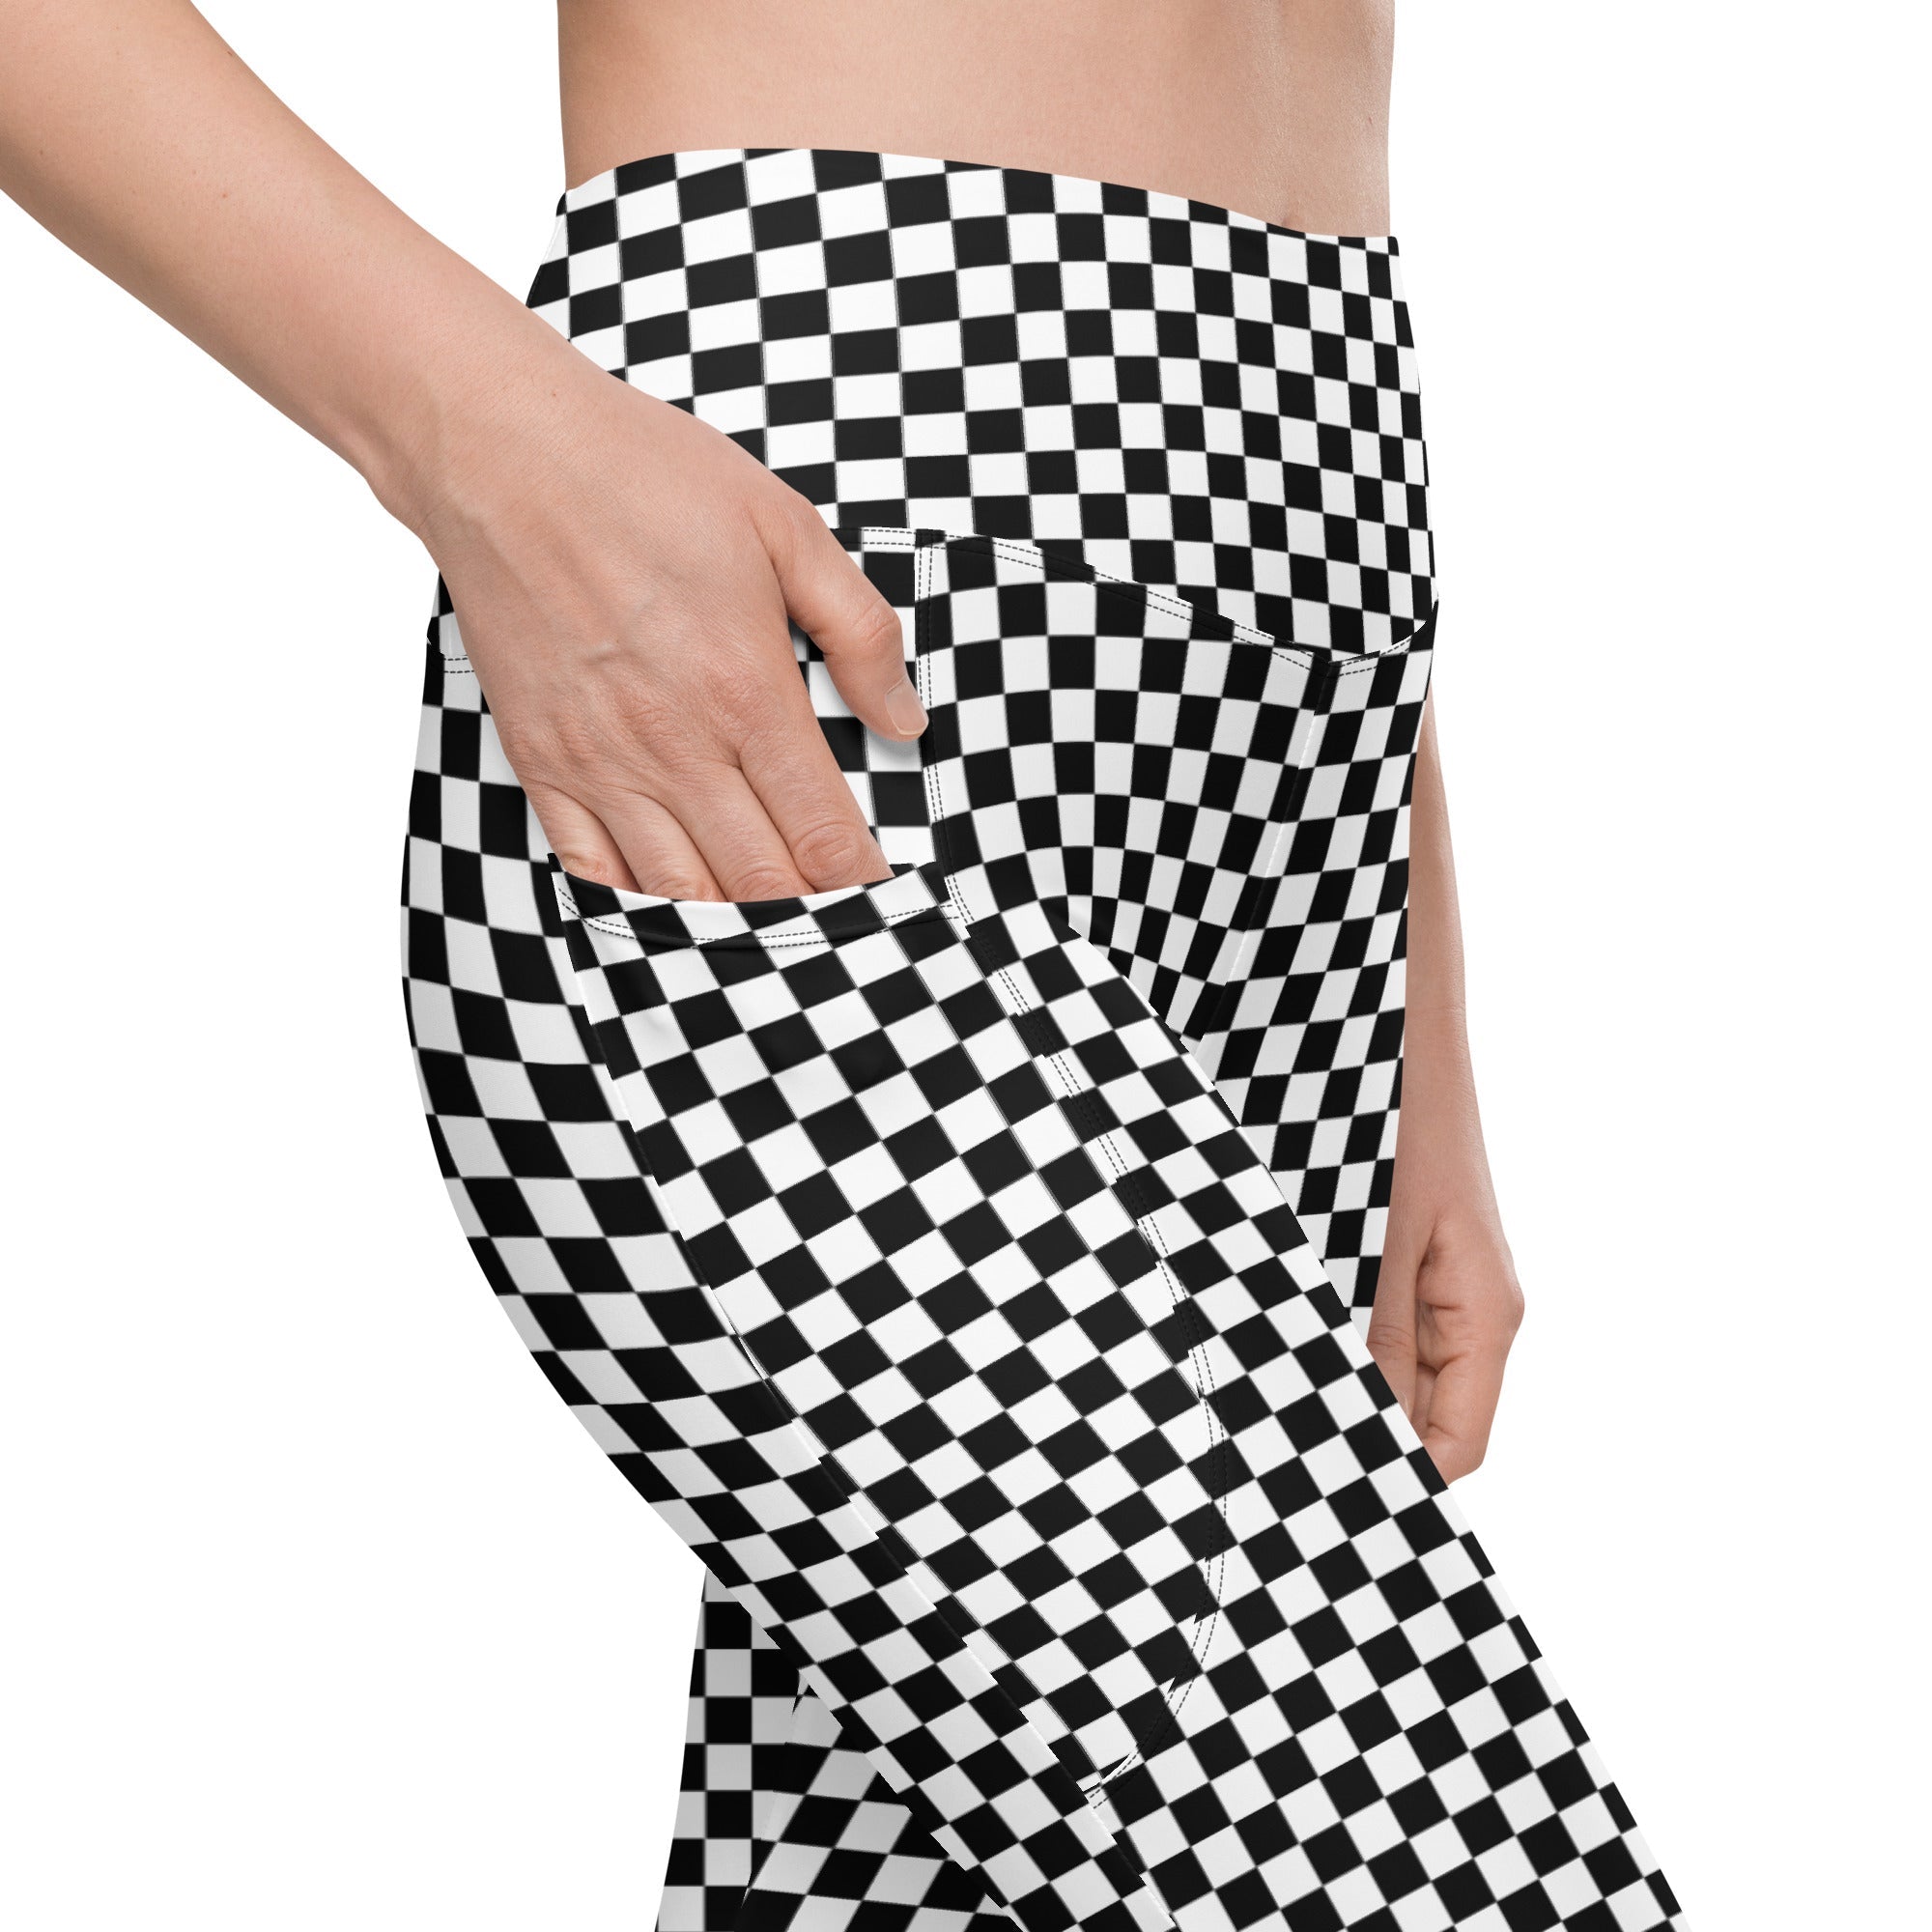 Checkered Leggings With Pockets